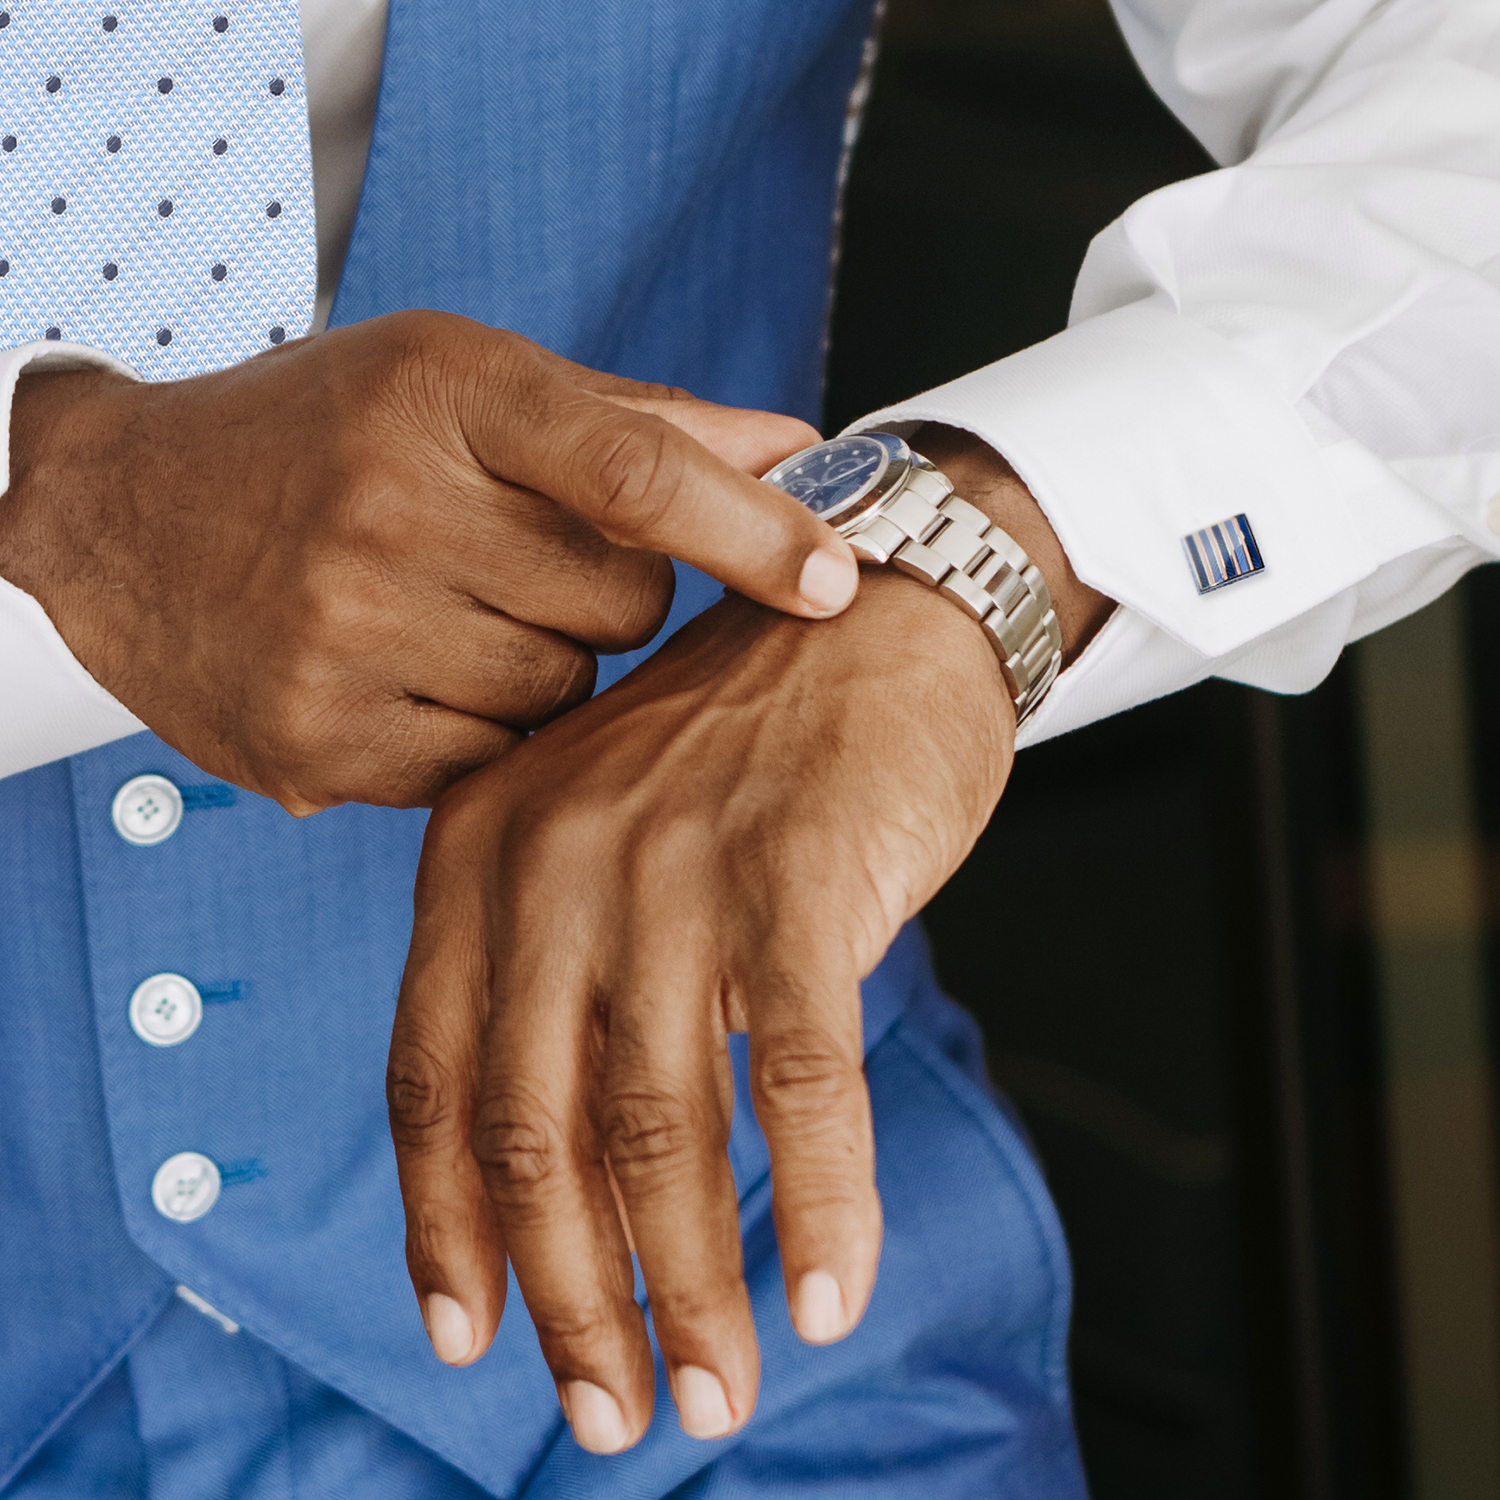 African American groom adjusting watch with cufflinks on